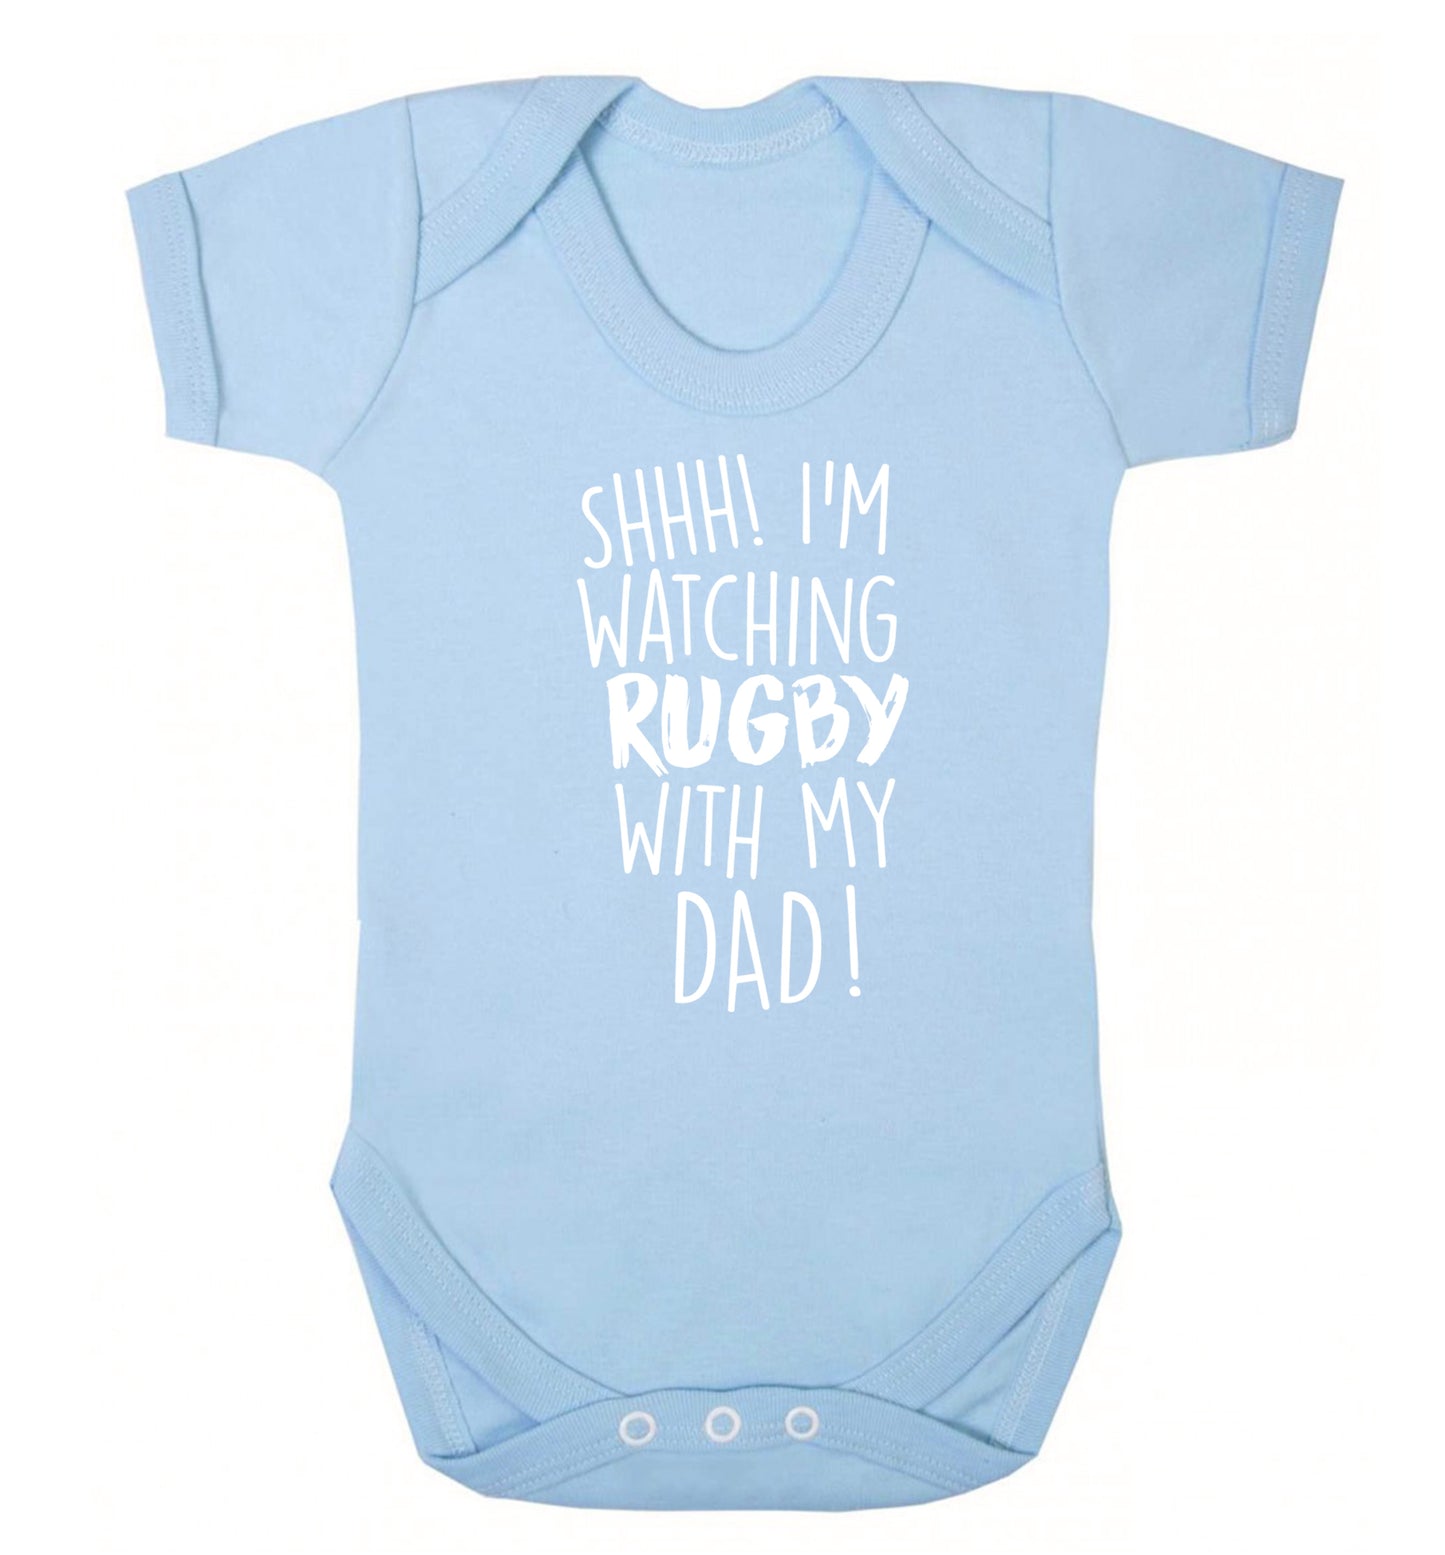 Shh... I'm watching rugby with my dad Baby Vest pale blue 18-24 months